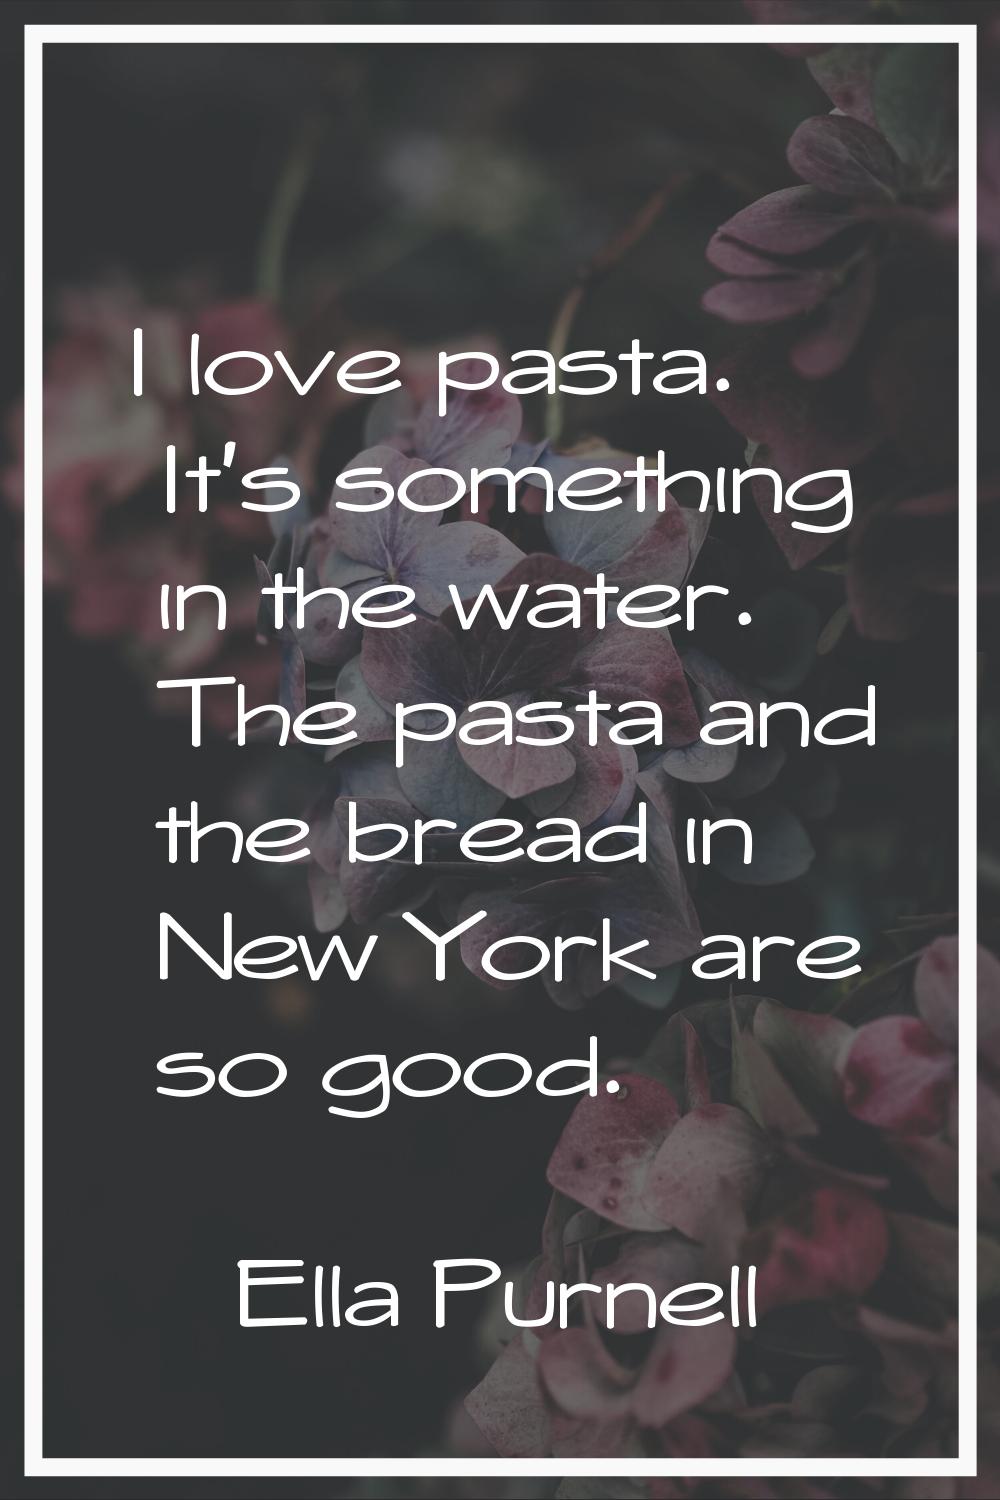 I love pasta. It's something in the water. The pasta and the bread in New York are so good.